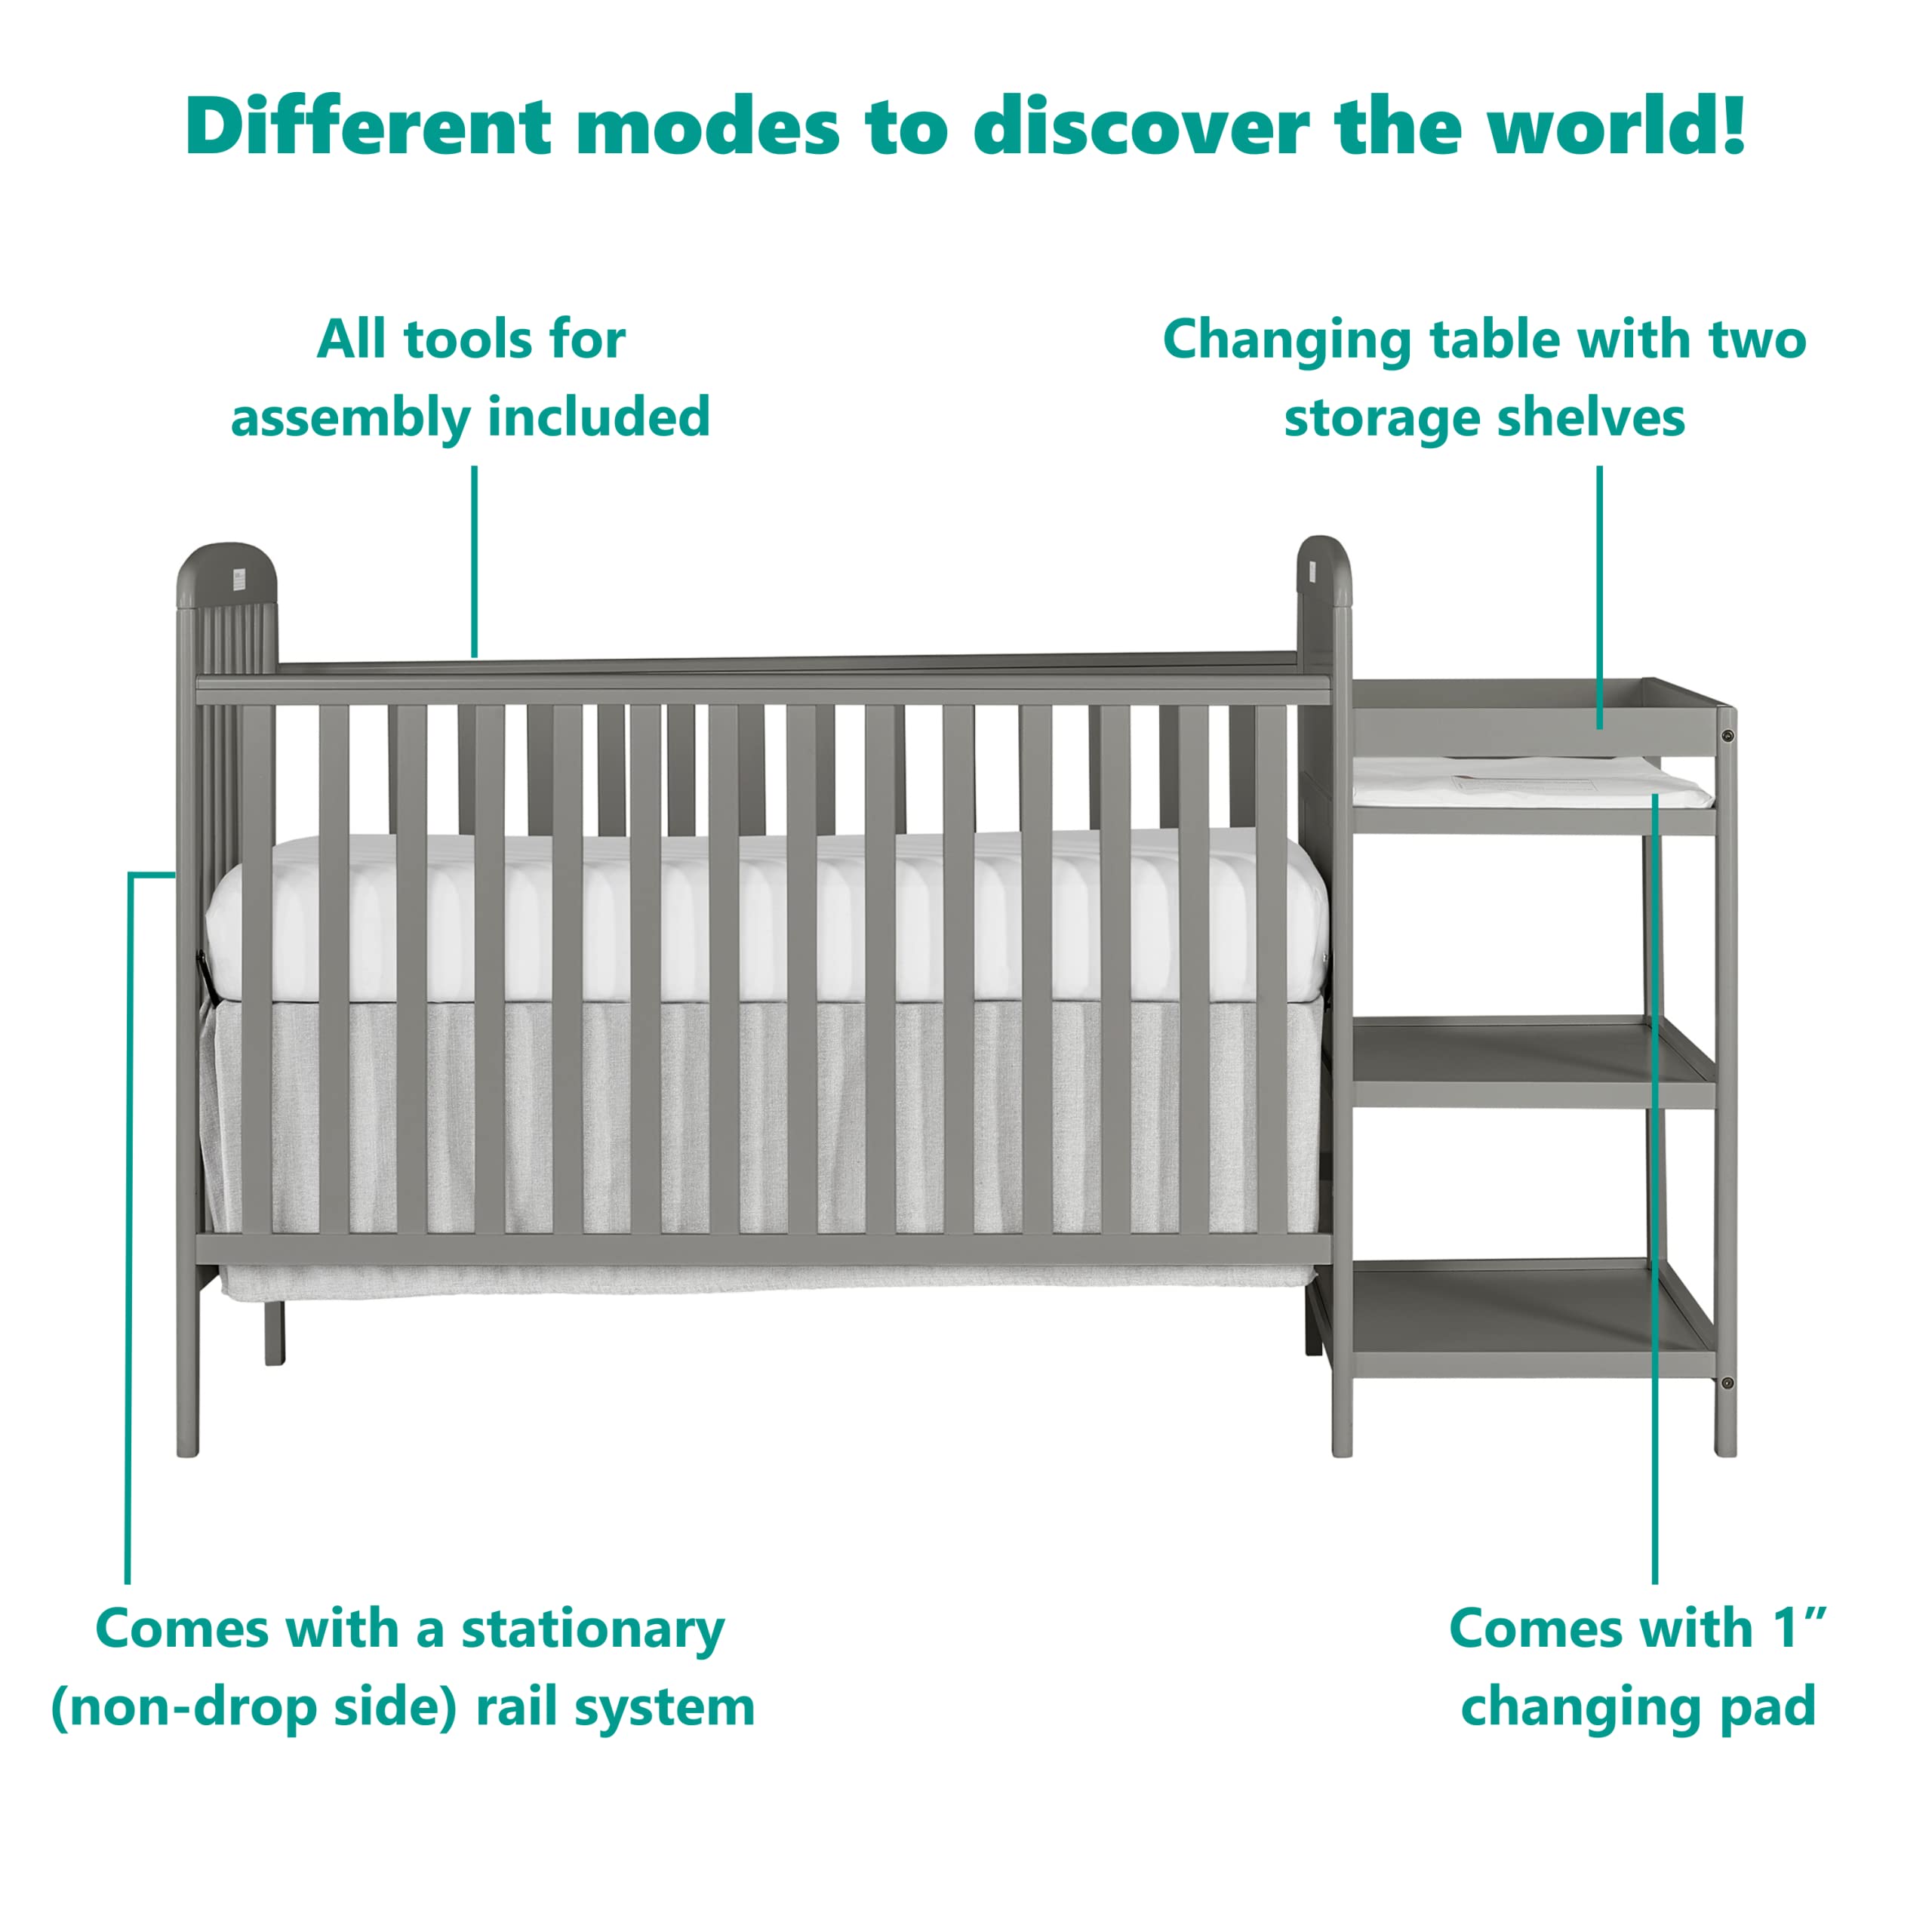 Dream On Me Anna 3-in-1 Full-Size Crib and Changing Table Combo in Steel Grey, Greenguard Gold Certified, Non-Toxic Finishes, Includes 1